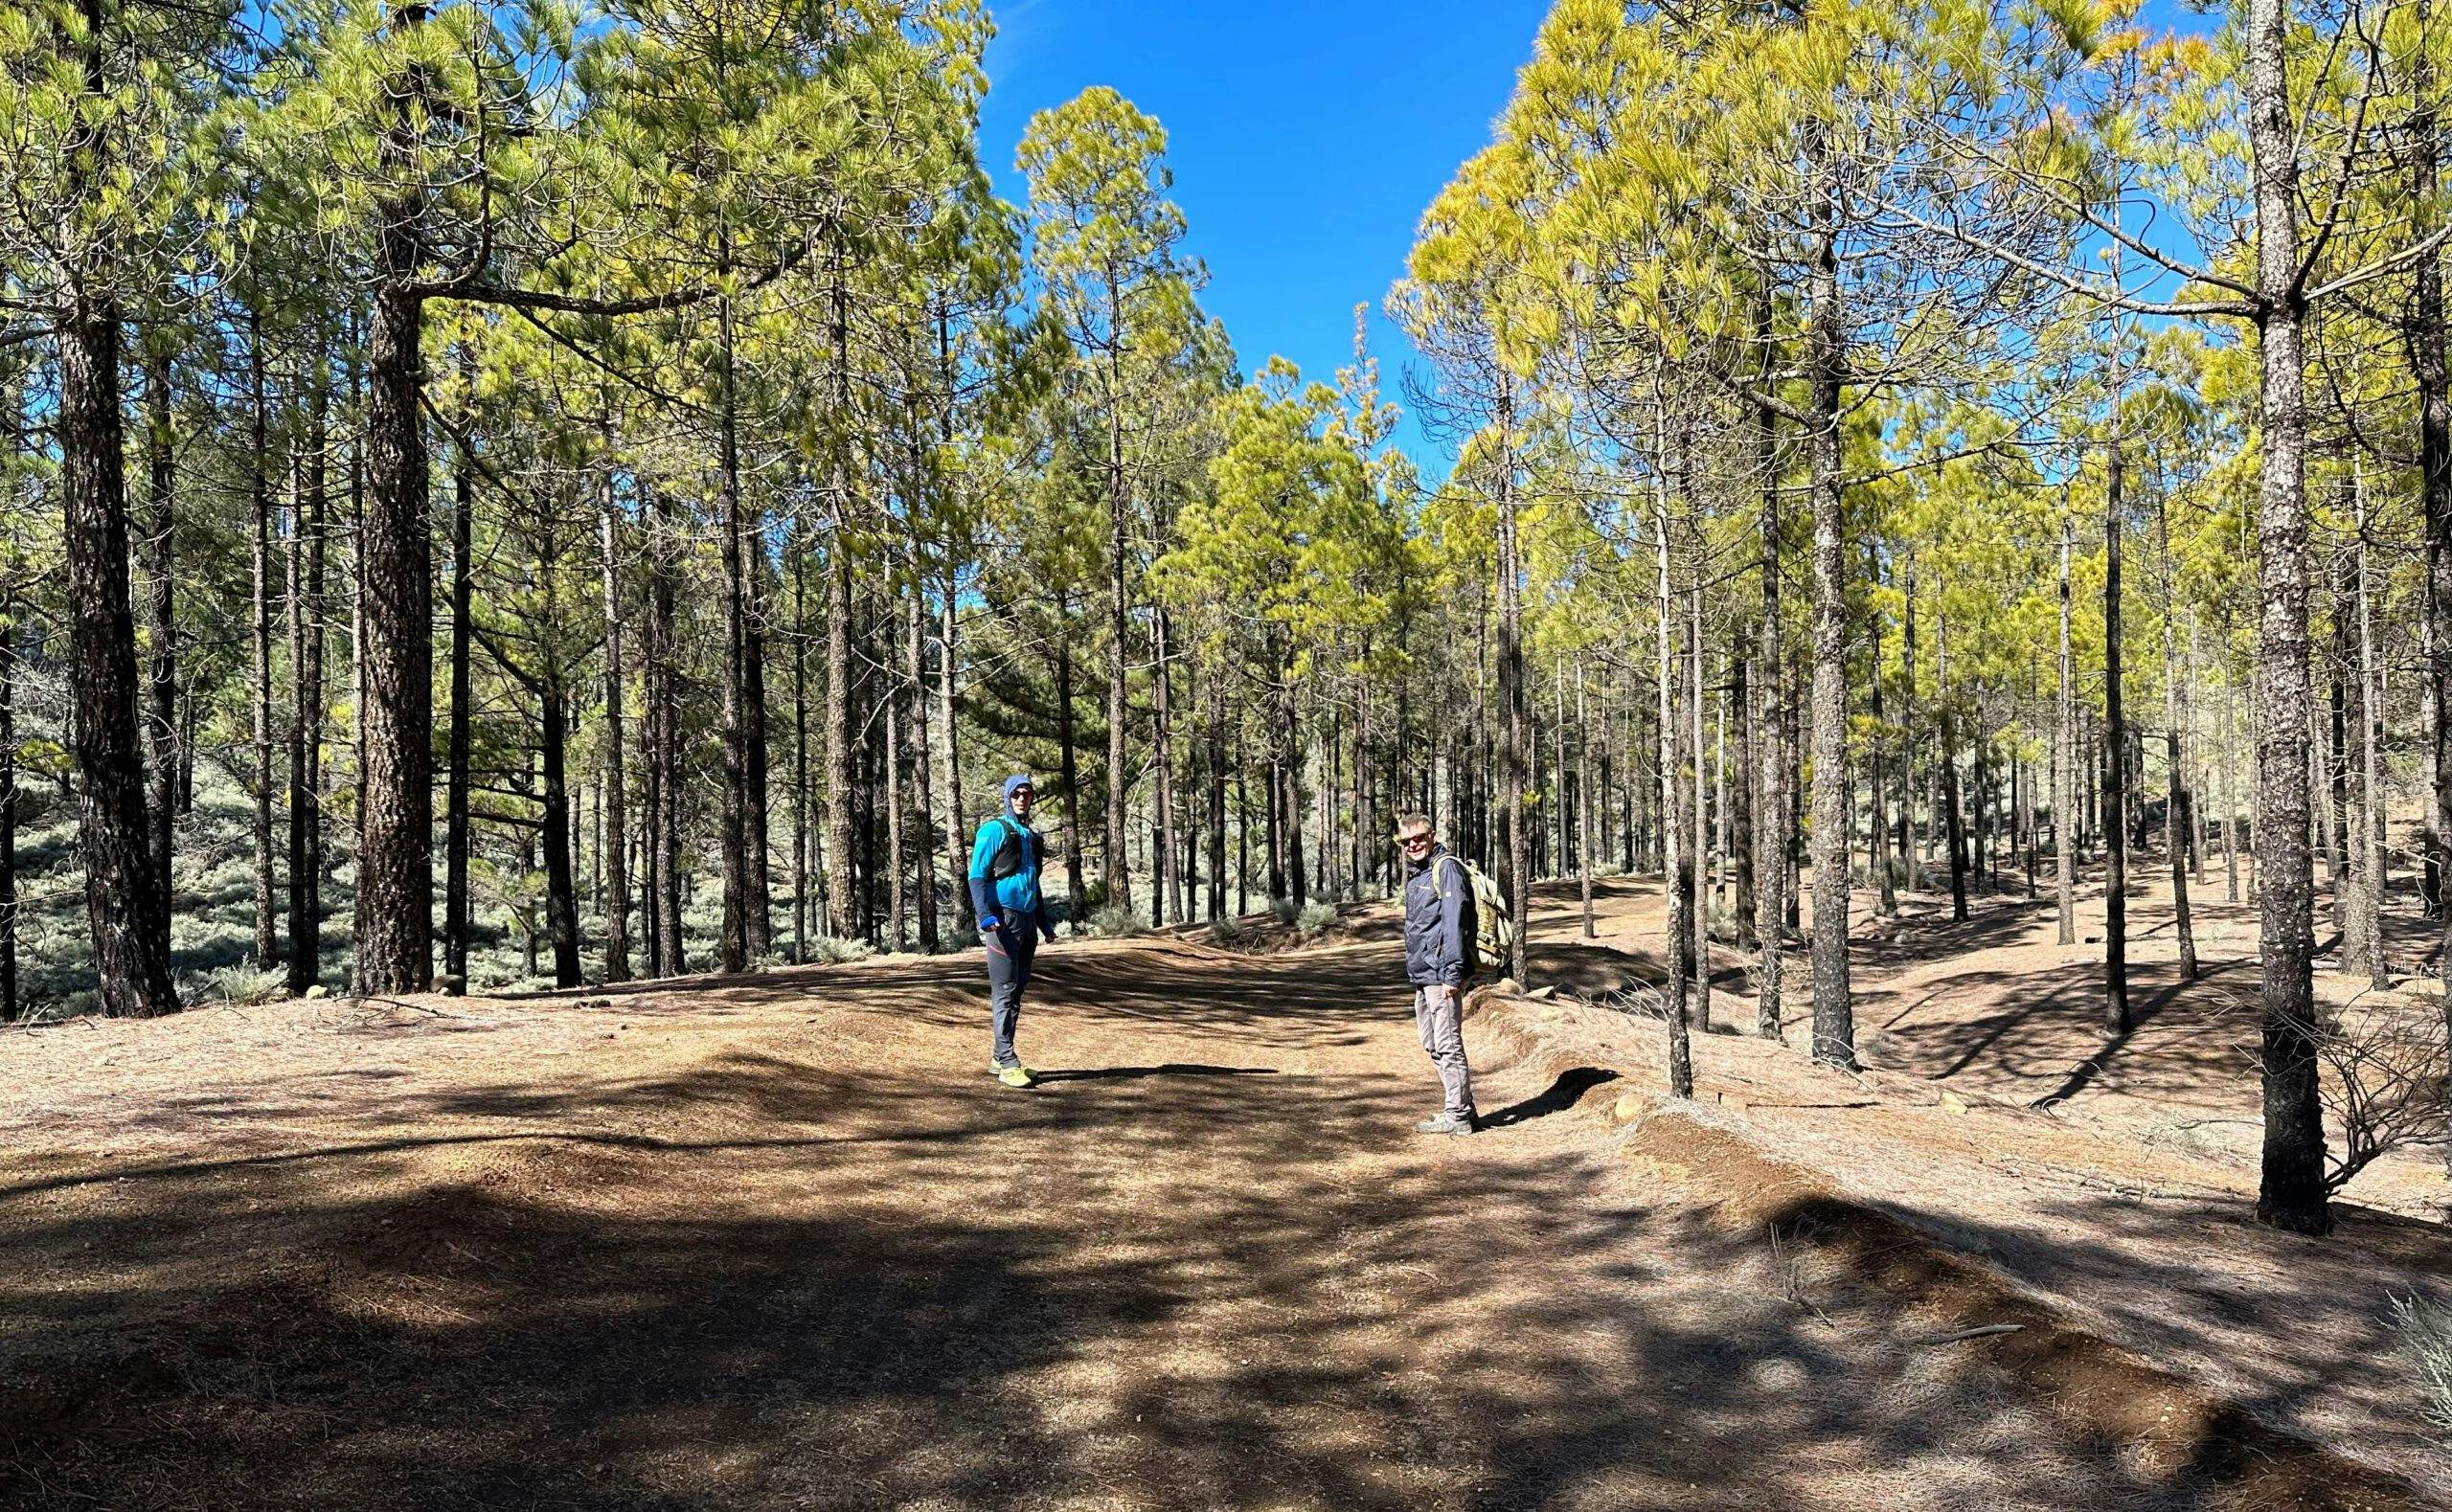 Hikers on the forest path on the Cumbre shortly before the turn-off towards Santa Lucia de Tirajana